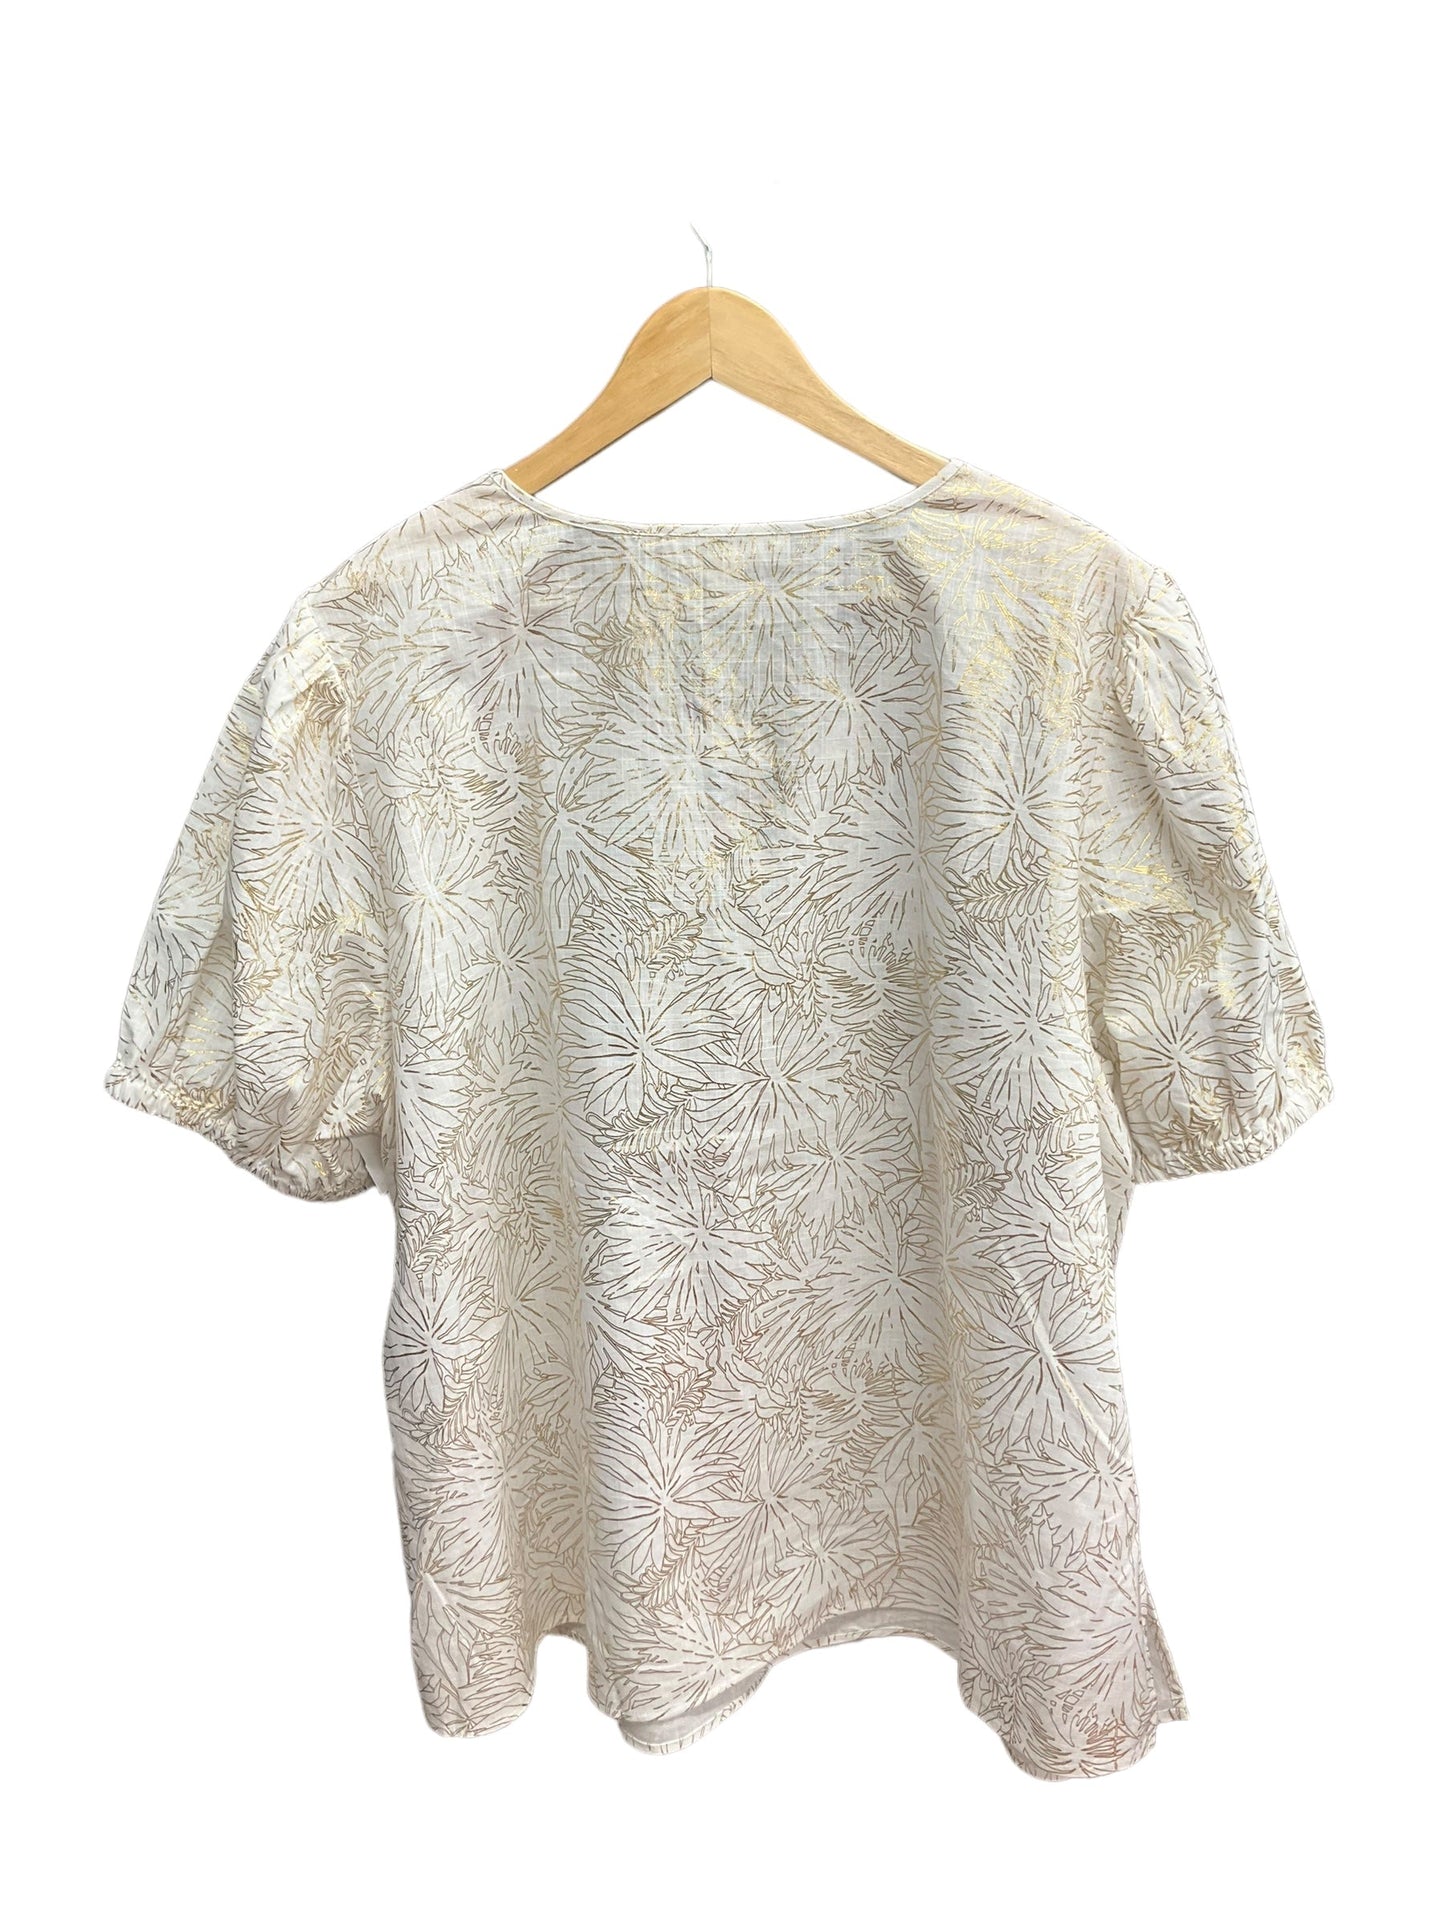 Gold & White Top Short Sleeve Michael By Michael Kors, Size 3x